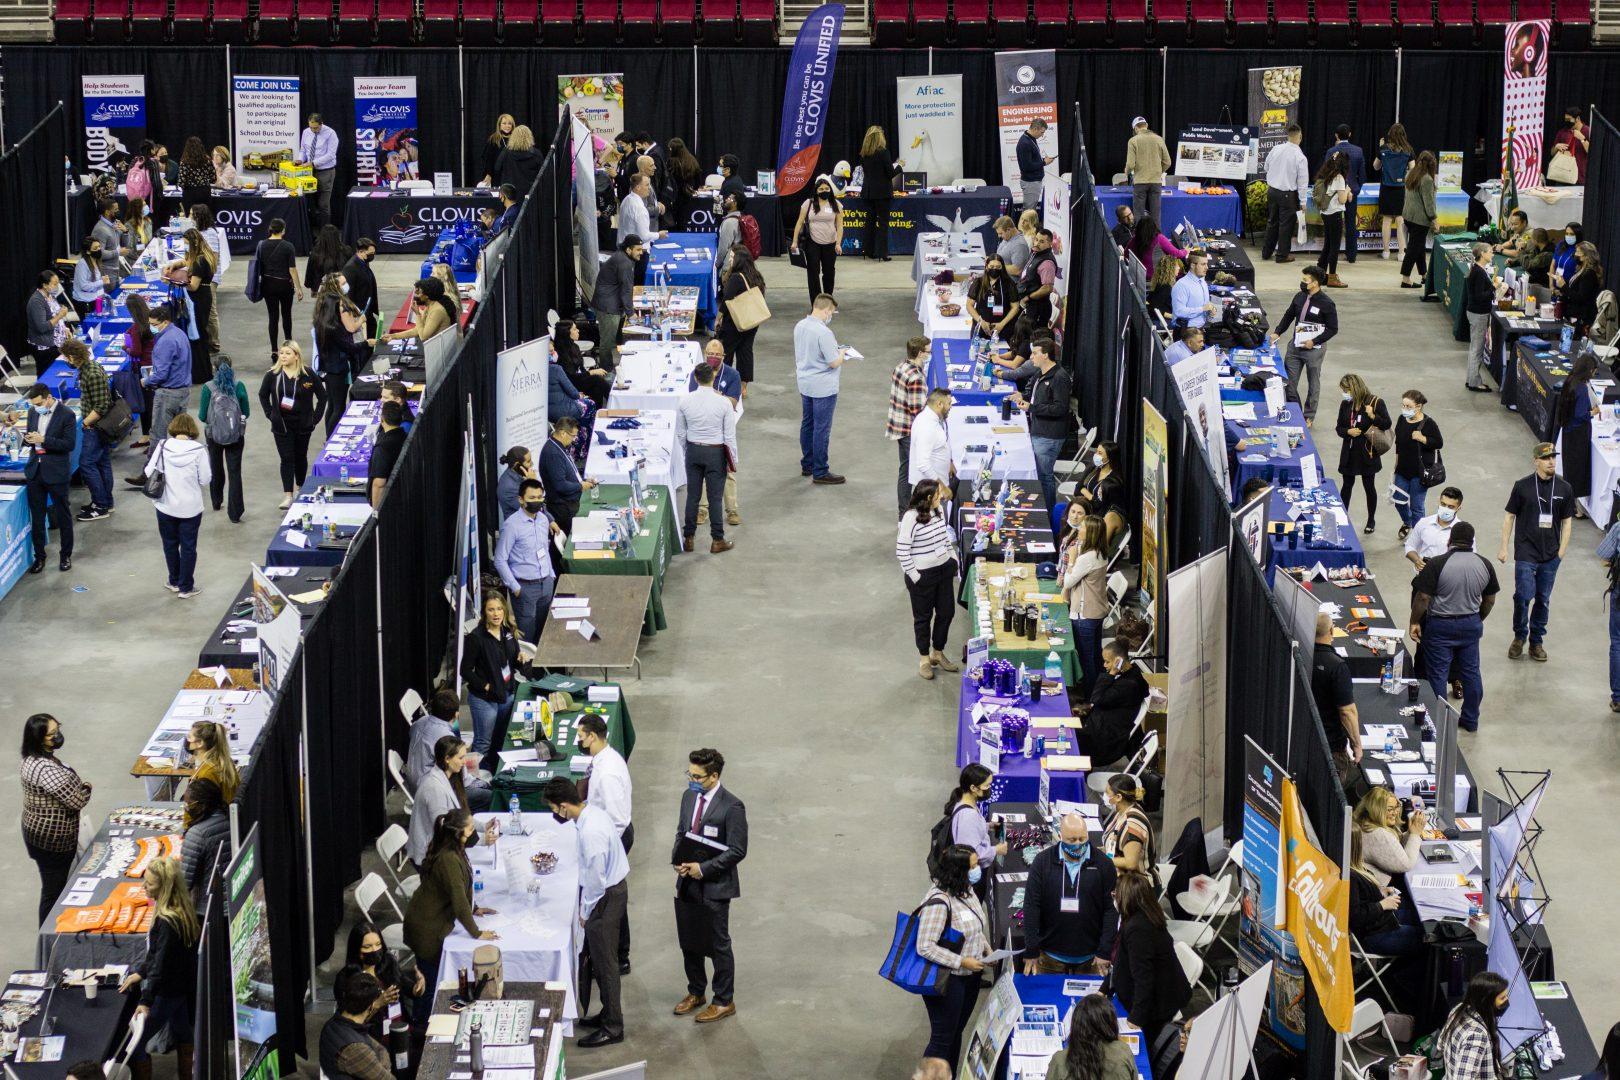 Over 160 companies and 60 school districts joined the Career and Internship Fair at the Save Mart Center on March 9, 2022.